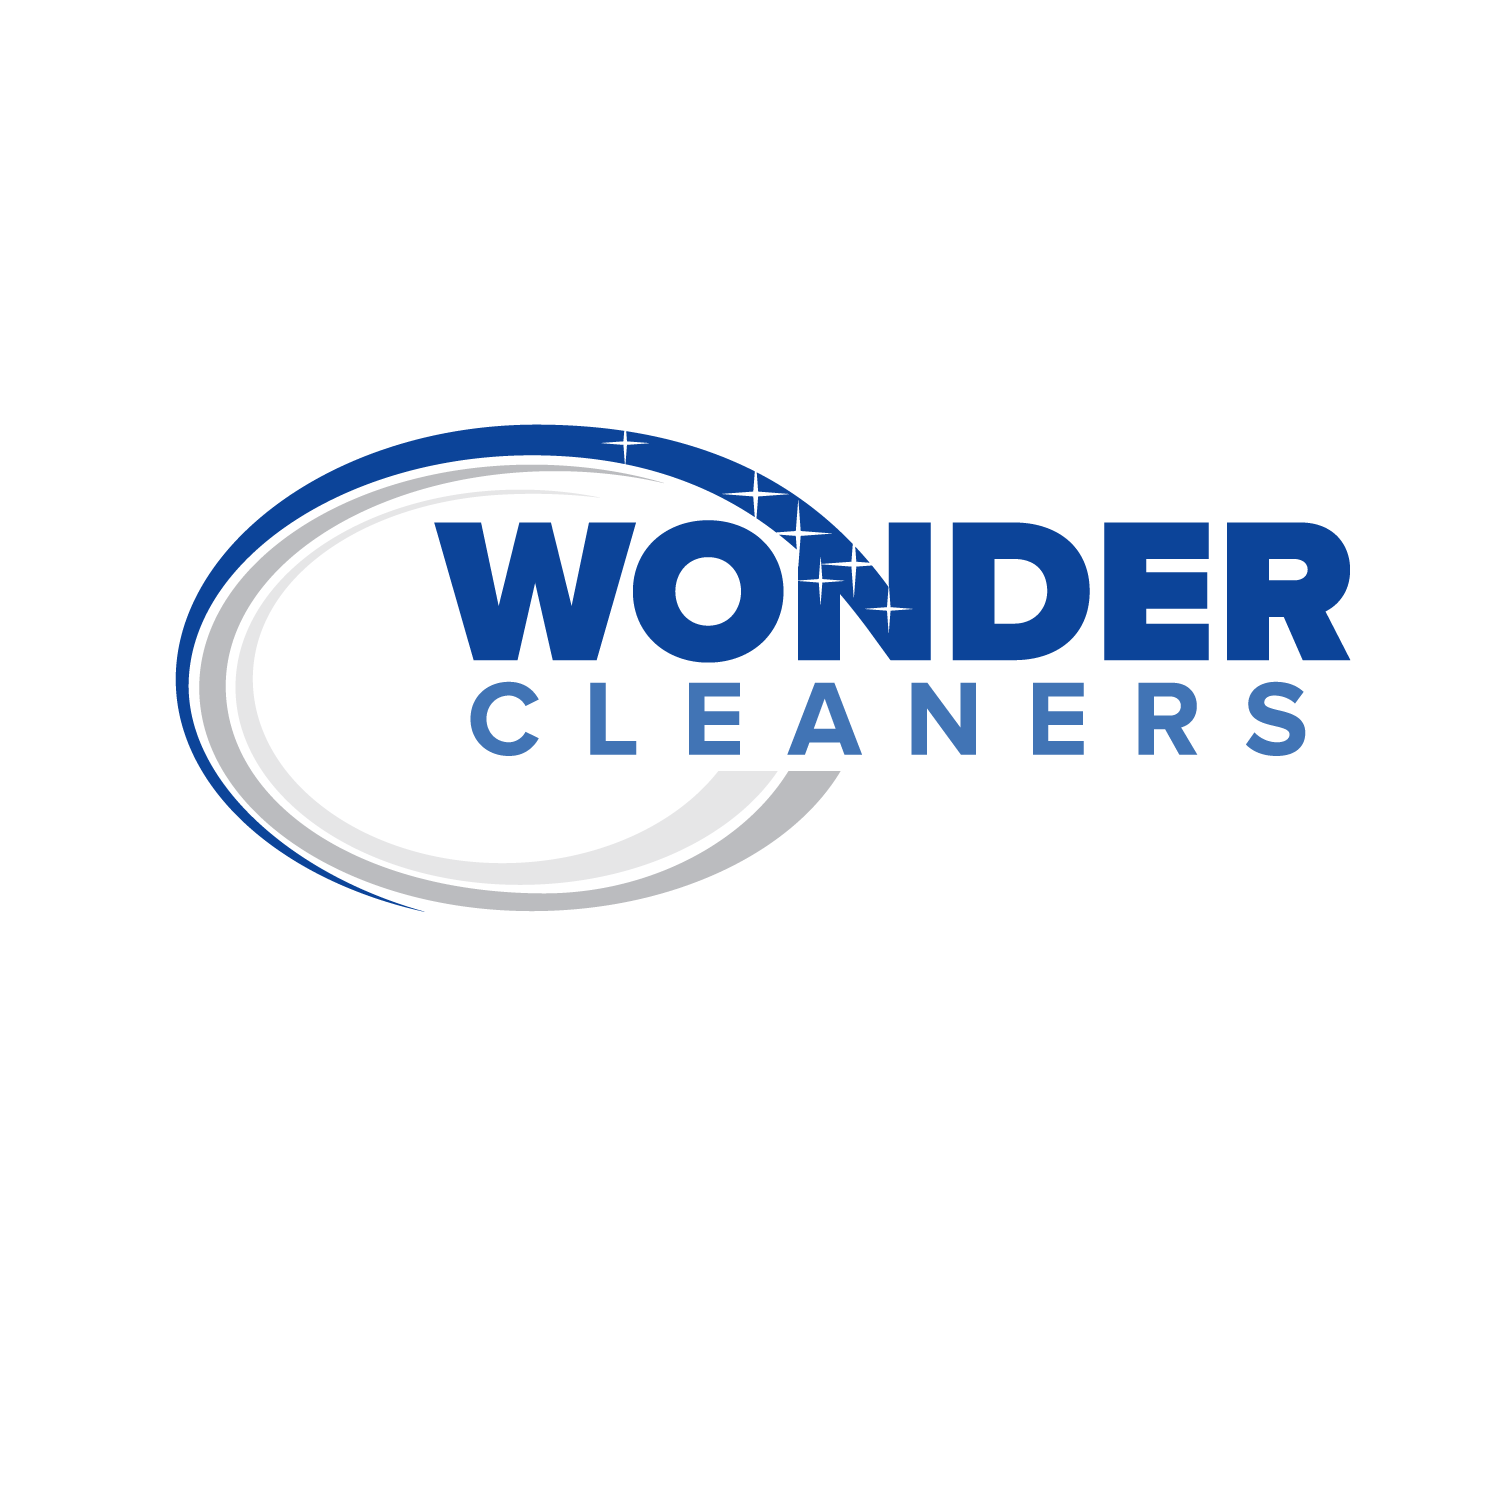 CC Lightning Logo - Modern, Masculine, House Cleaning Logo Design for Wonder Cleaners by ...